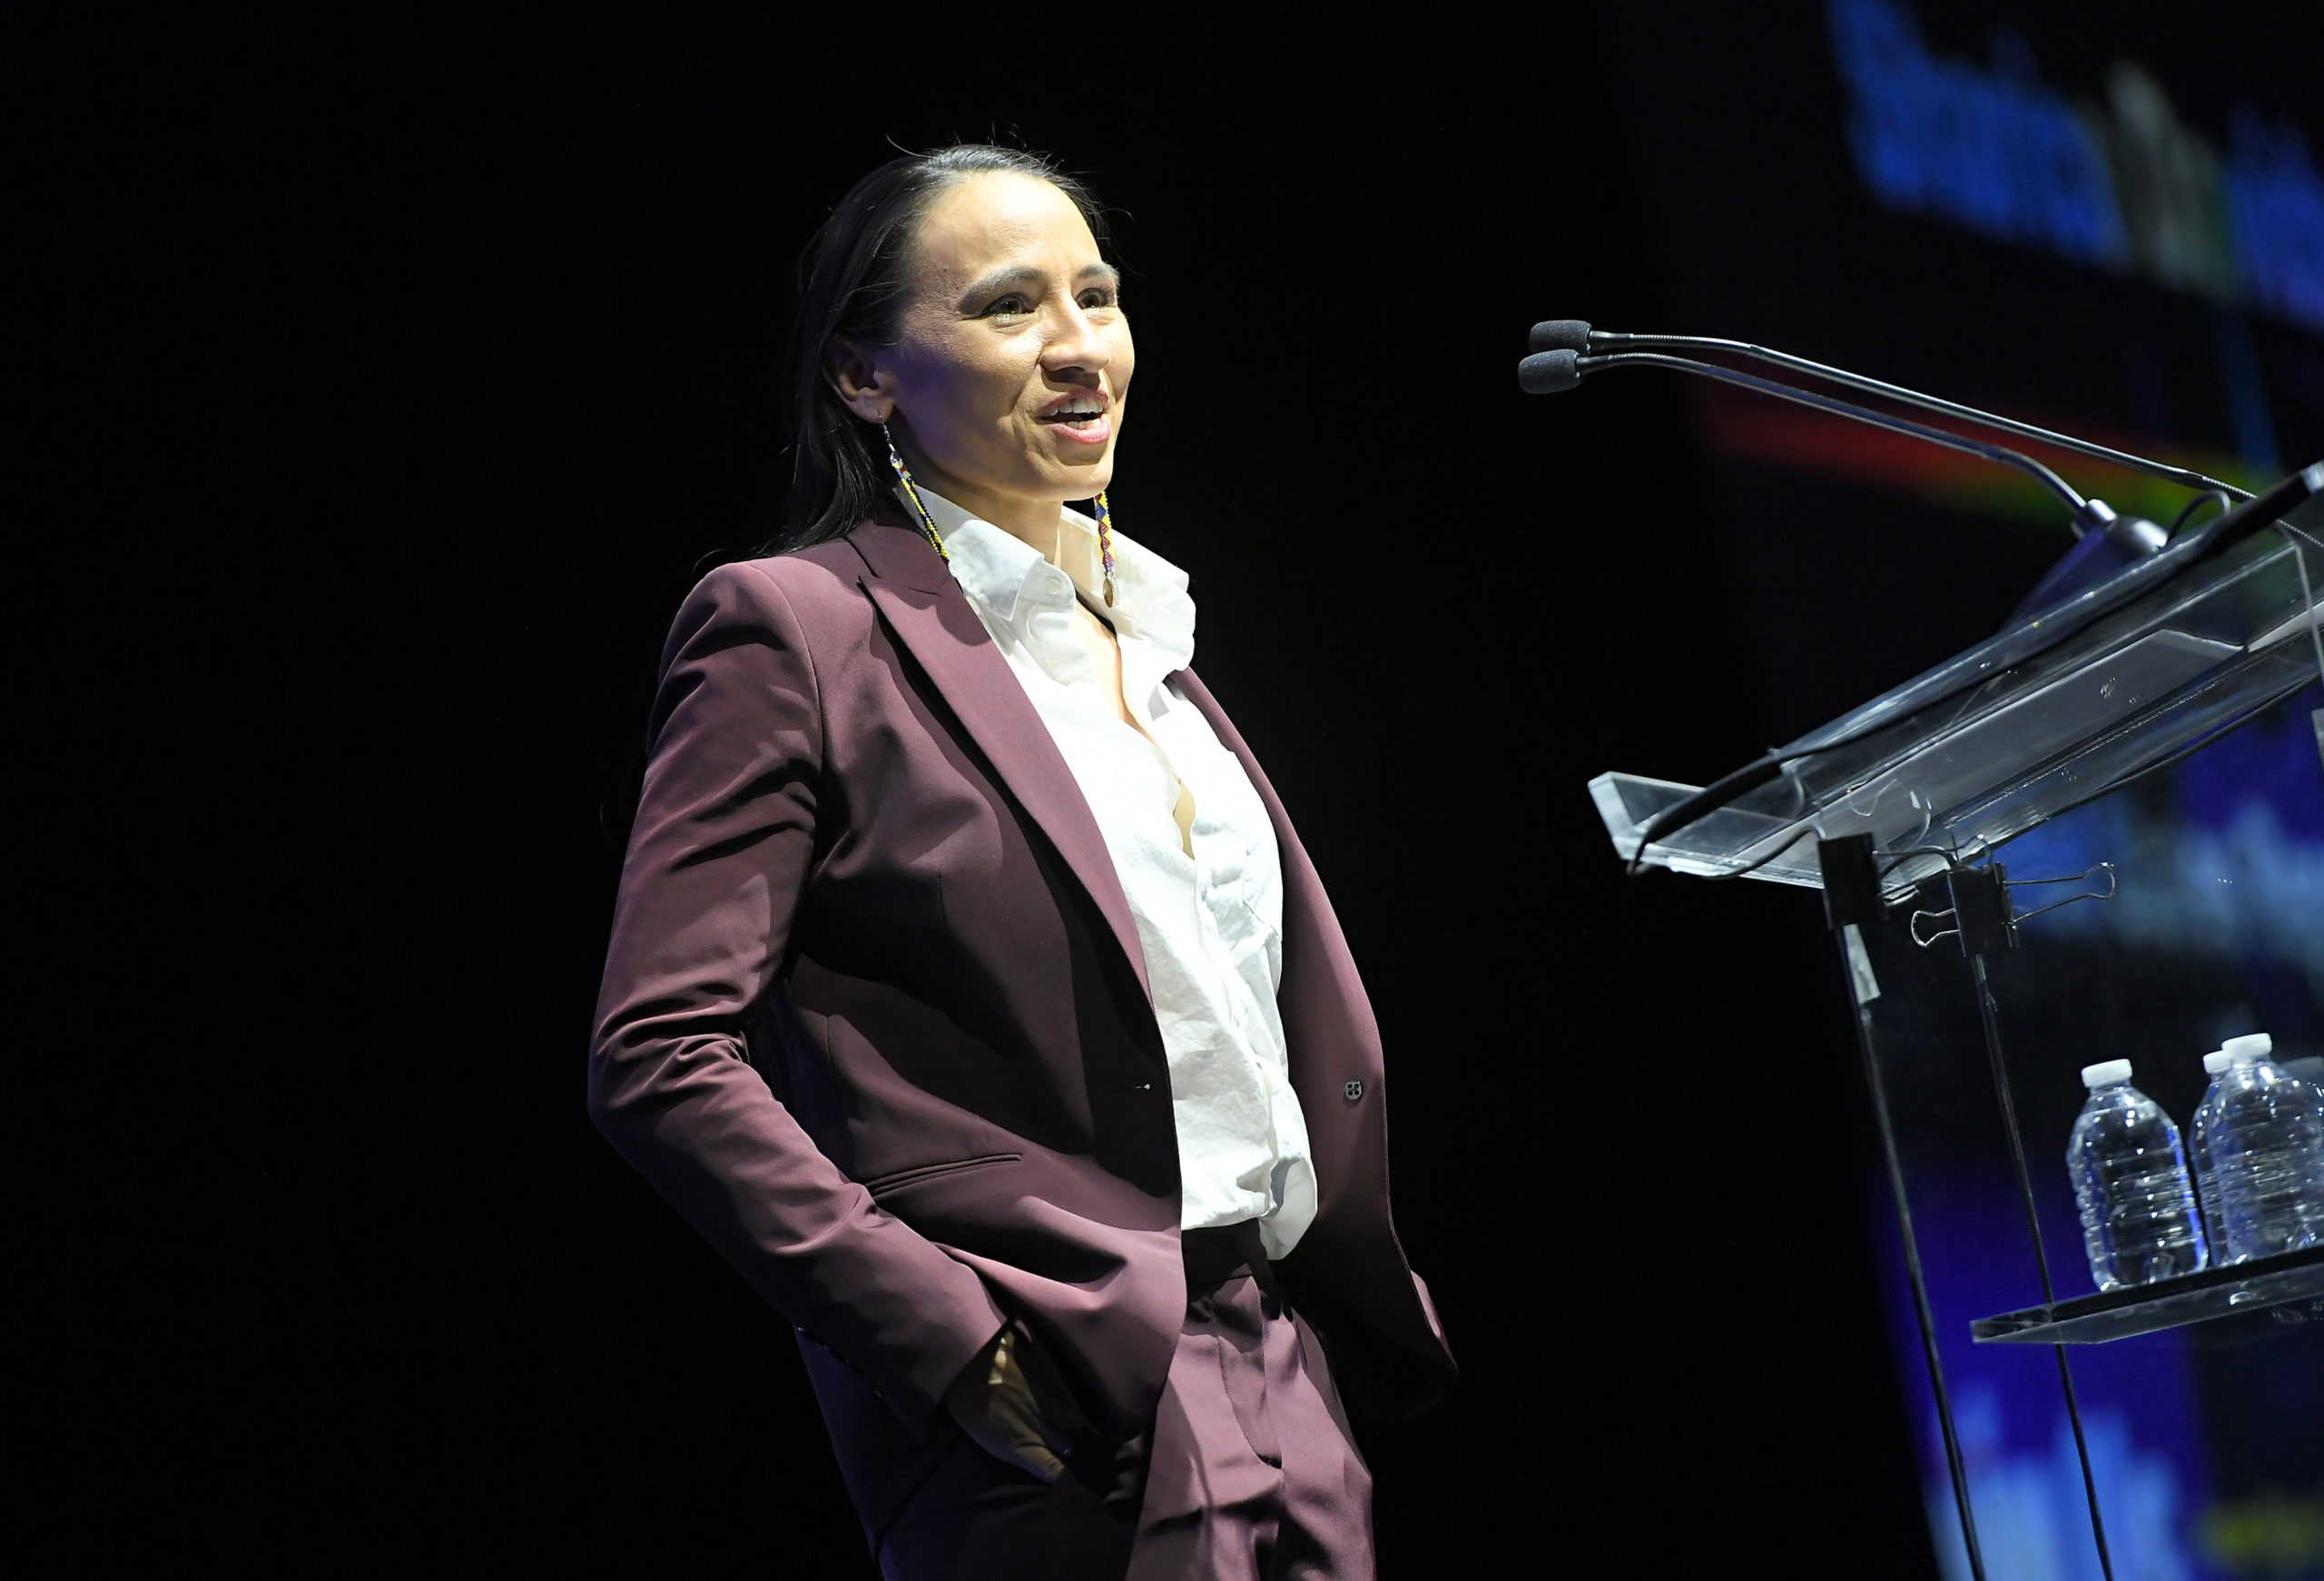 LOS ANGELES, CALIFORNIA - MARCH 12: Rep. Sharice Davids speaks onstage as Human Rights Campaign hosts the 2022 Los Angeles Dinner at JW Marriott on March 12, 2022 in Los Angeles, California. (Photo by Charley Gallay/Getty Images)